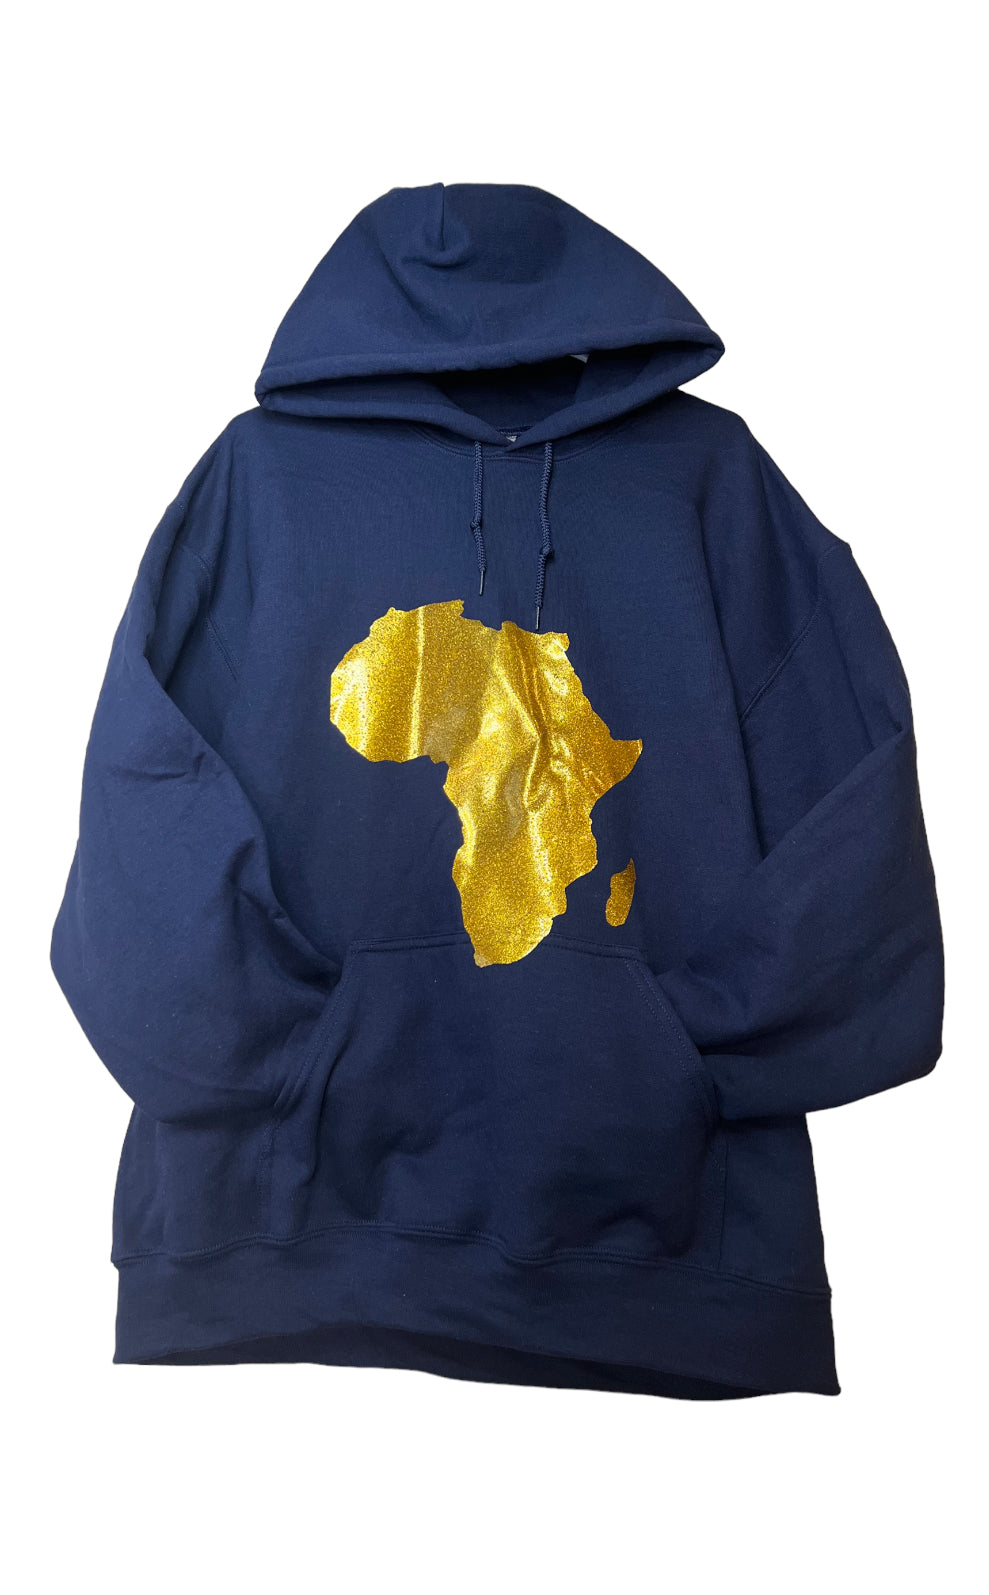 Royal Blue Navy Blue Black Men Women Unisex Hoodie with Gold Africa Map